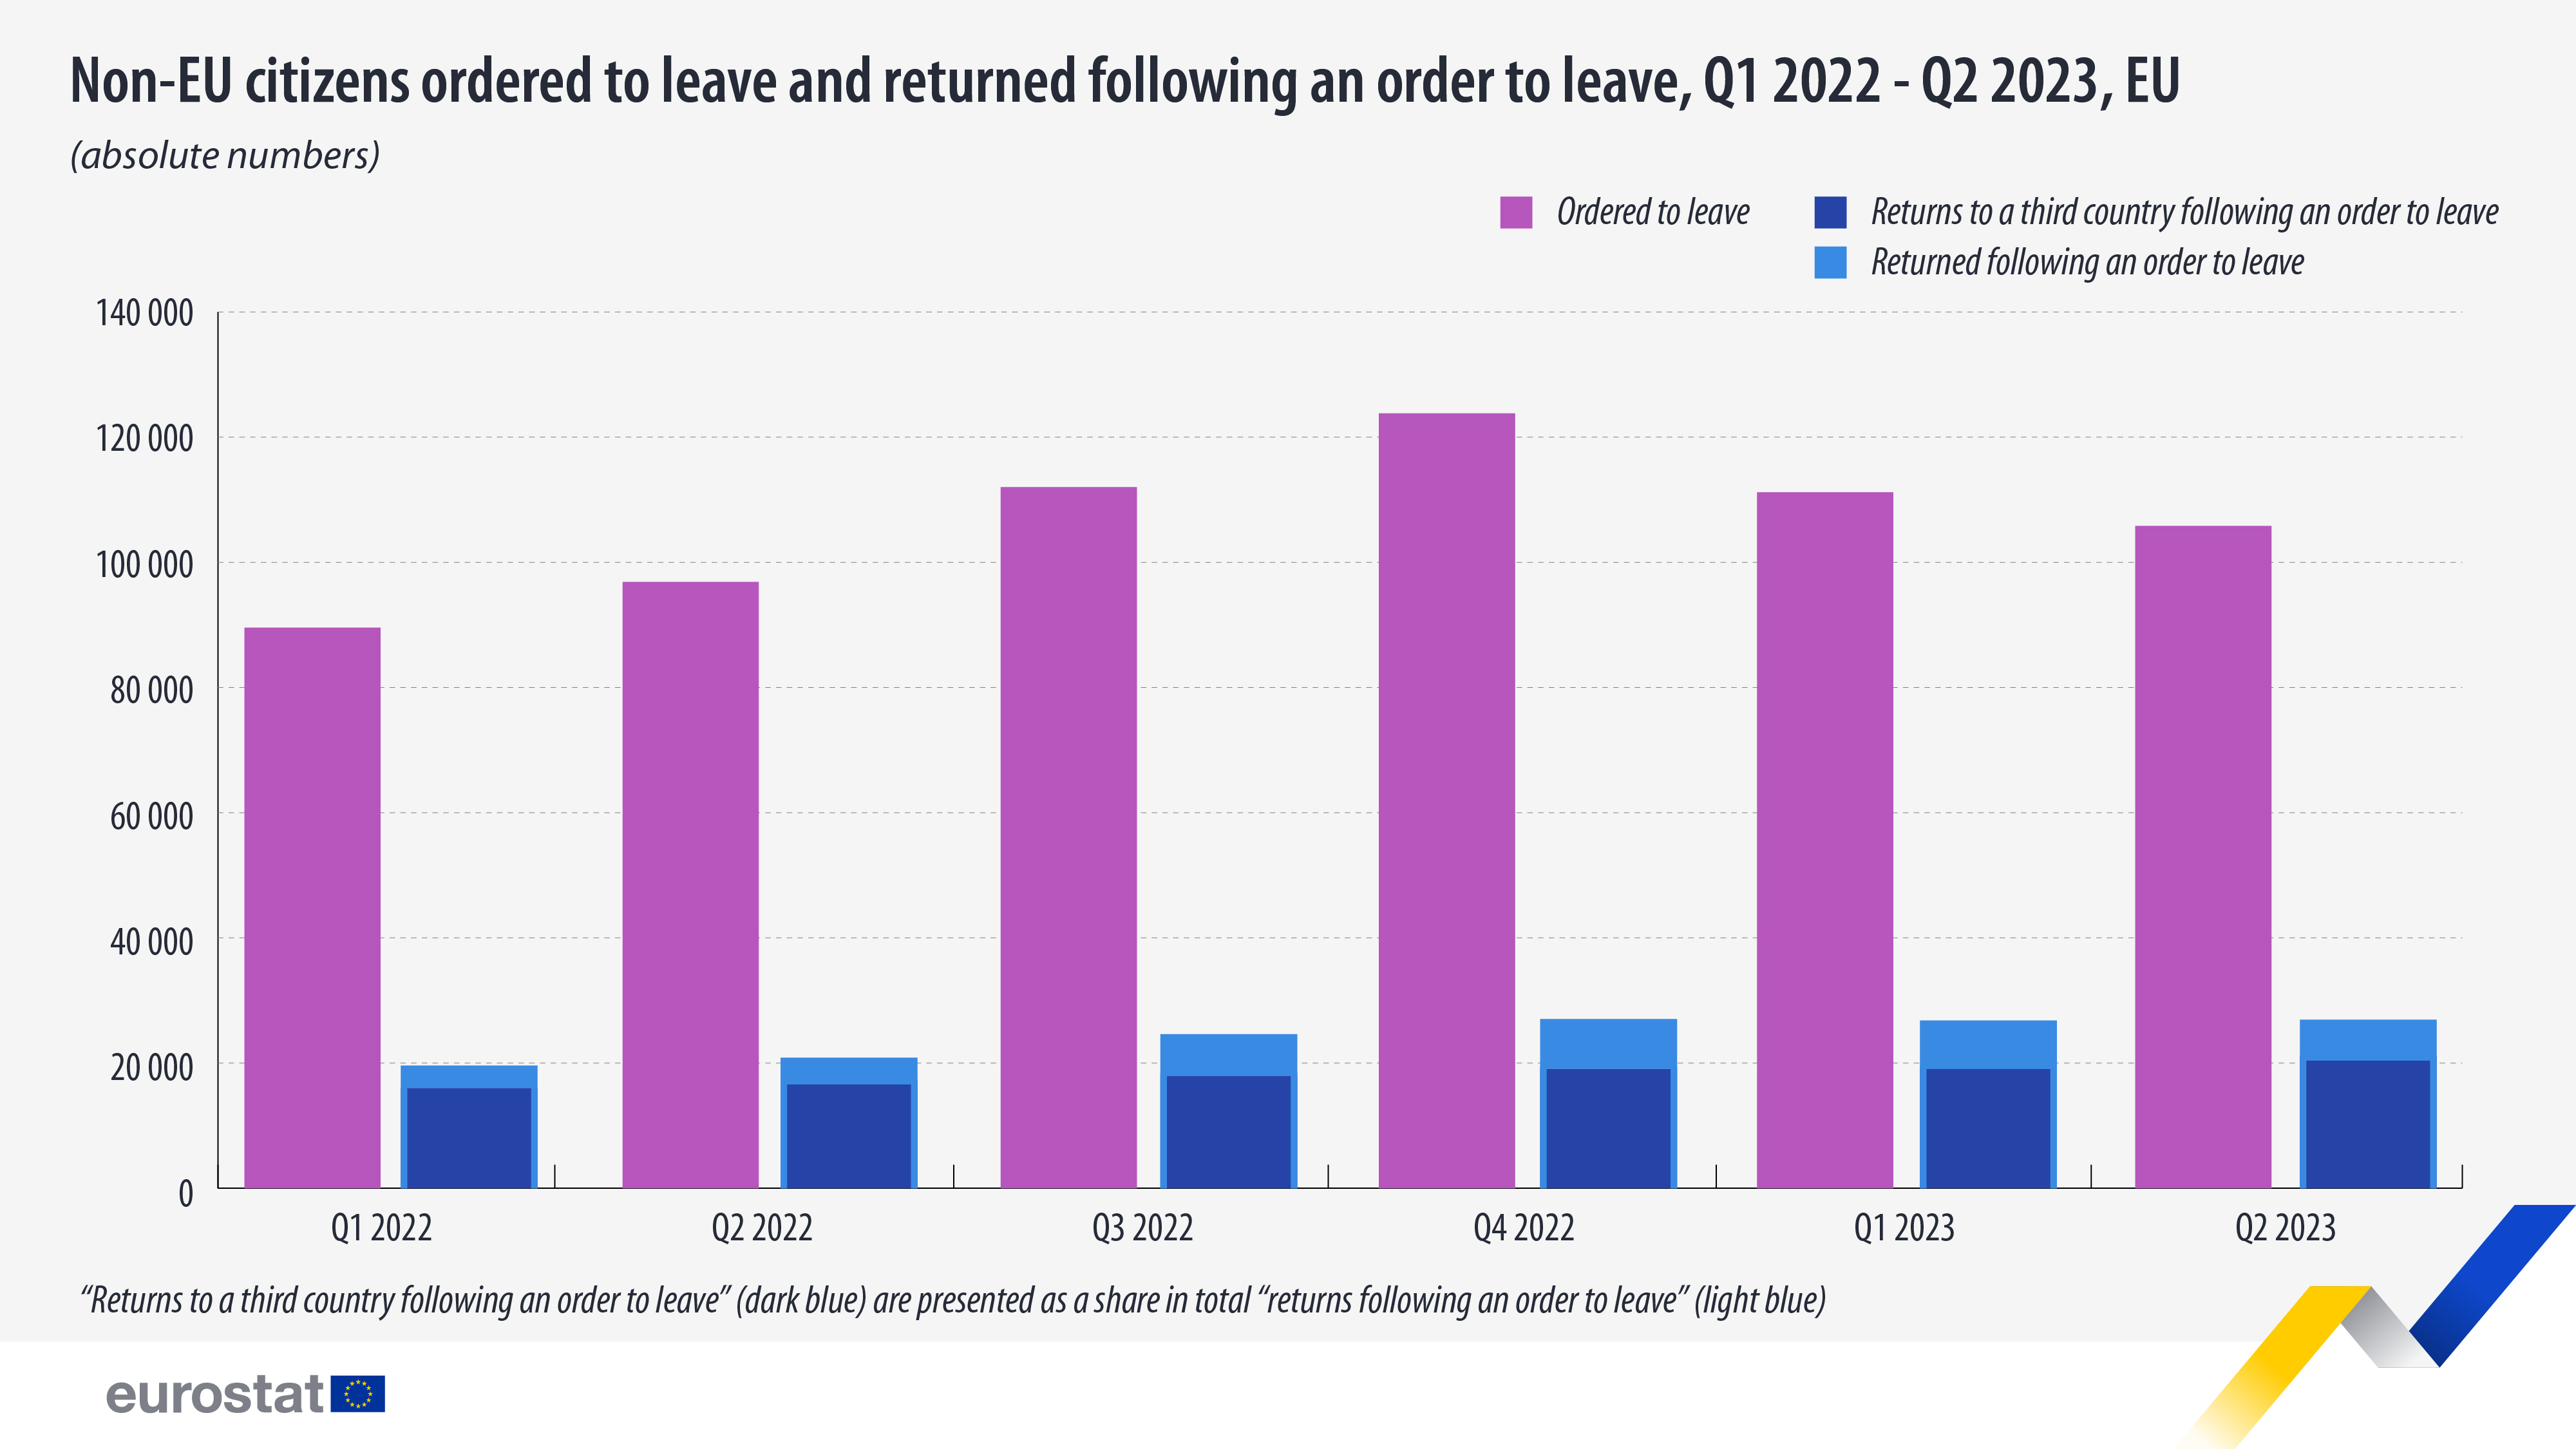 Bar chart: Non-EU citizens ordered to leave and returned following an order to leave, Q1 2022 - Q2 2023, EU